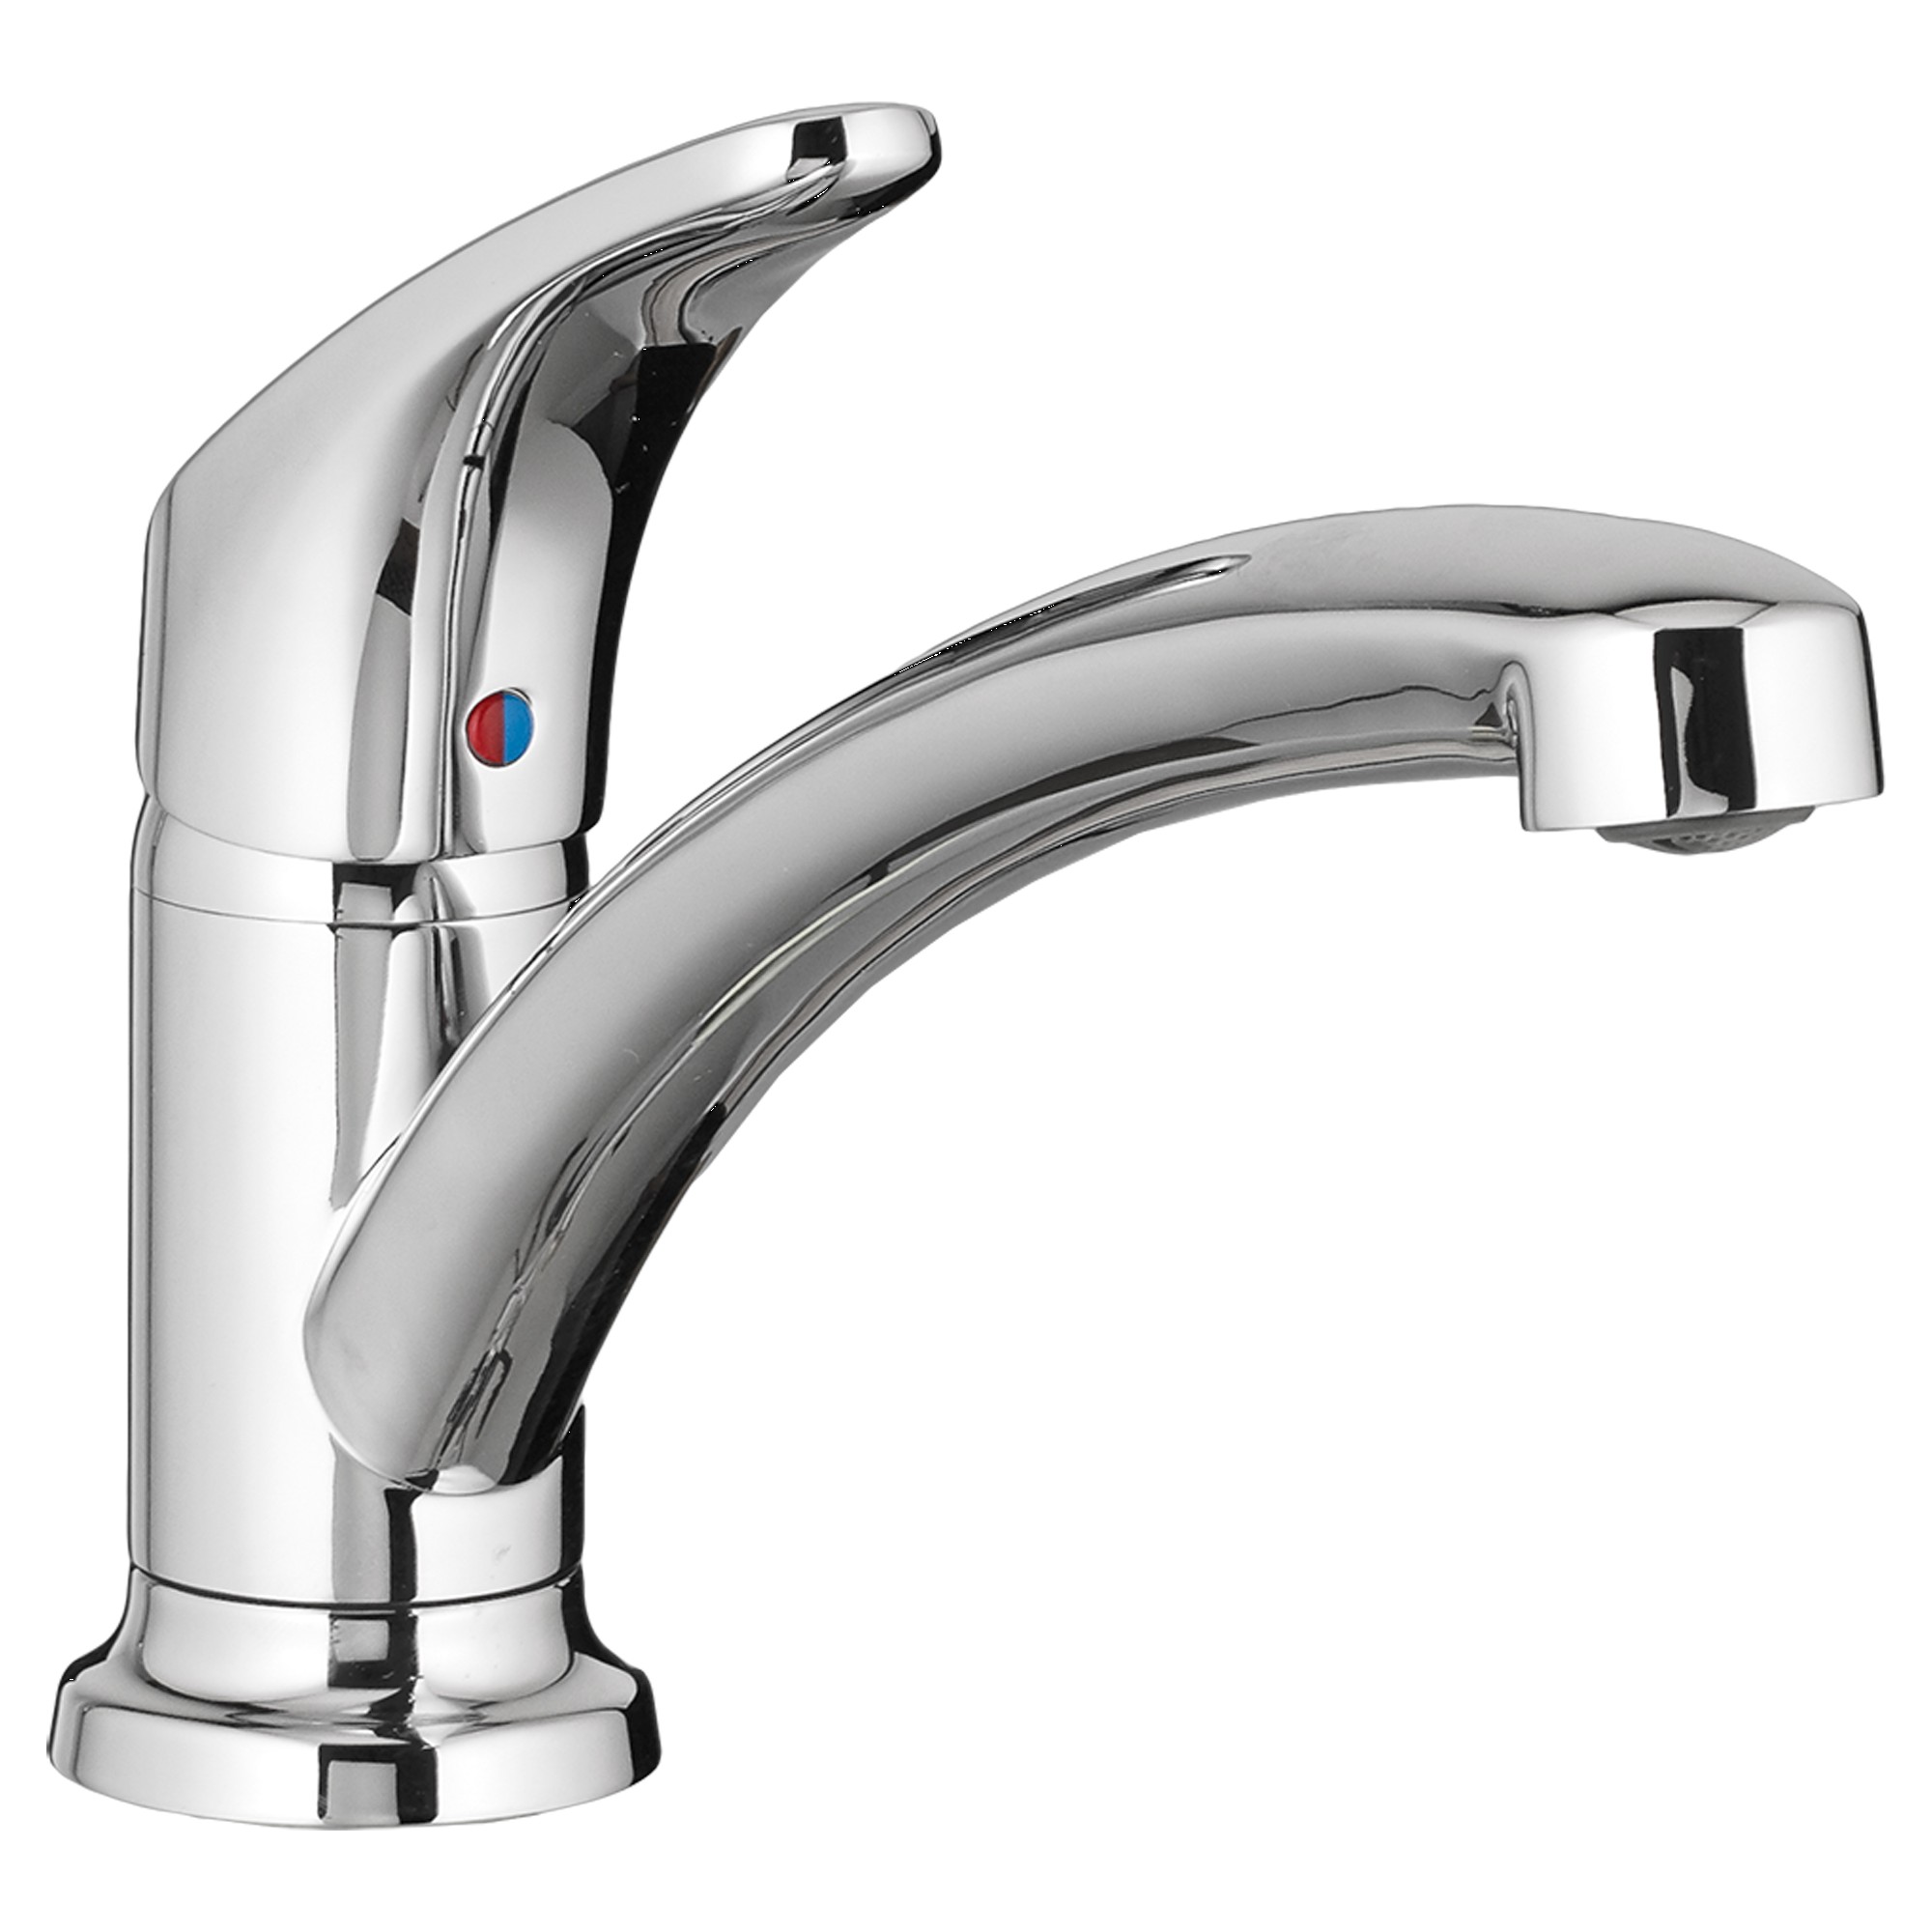 American Standard | 7074.010.002 | AMERICAN STANDARD 7074.010 COLONY PRO KITCHEN FAUCET CP 002 POLISHED CHROME  1-HANDLE 1-HOLE